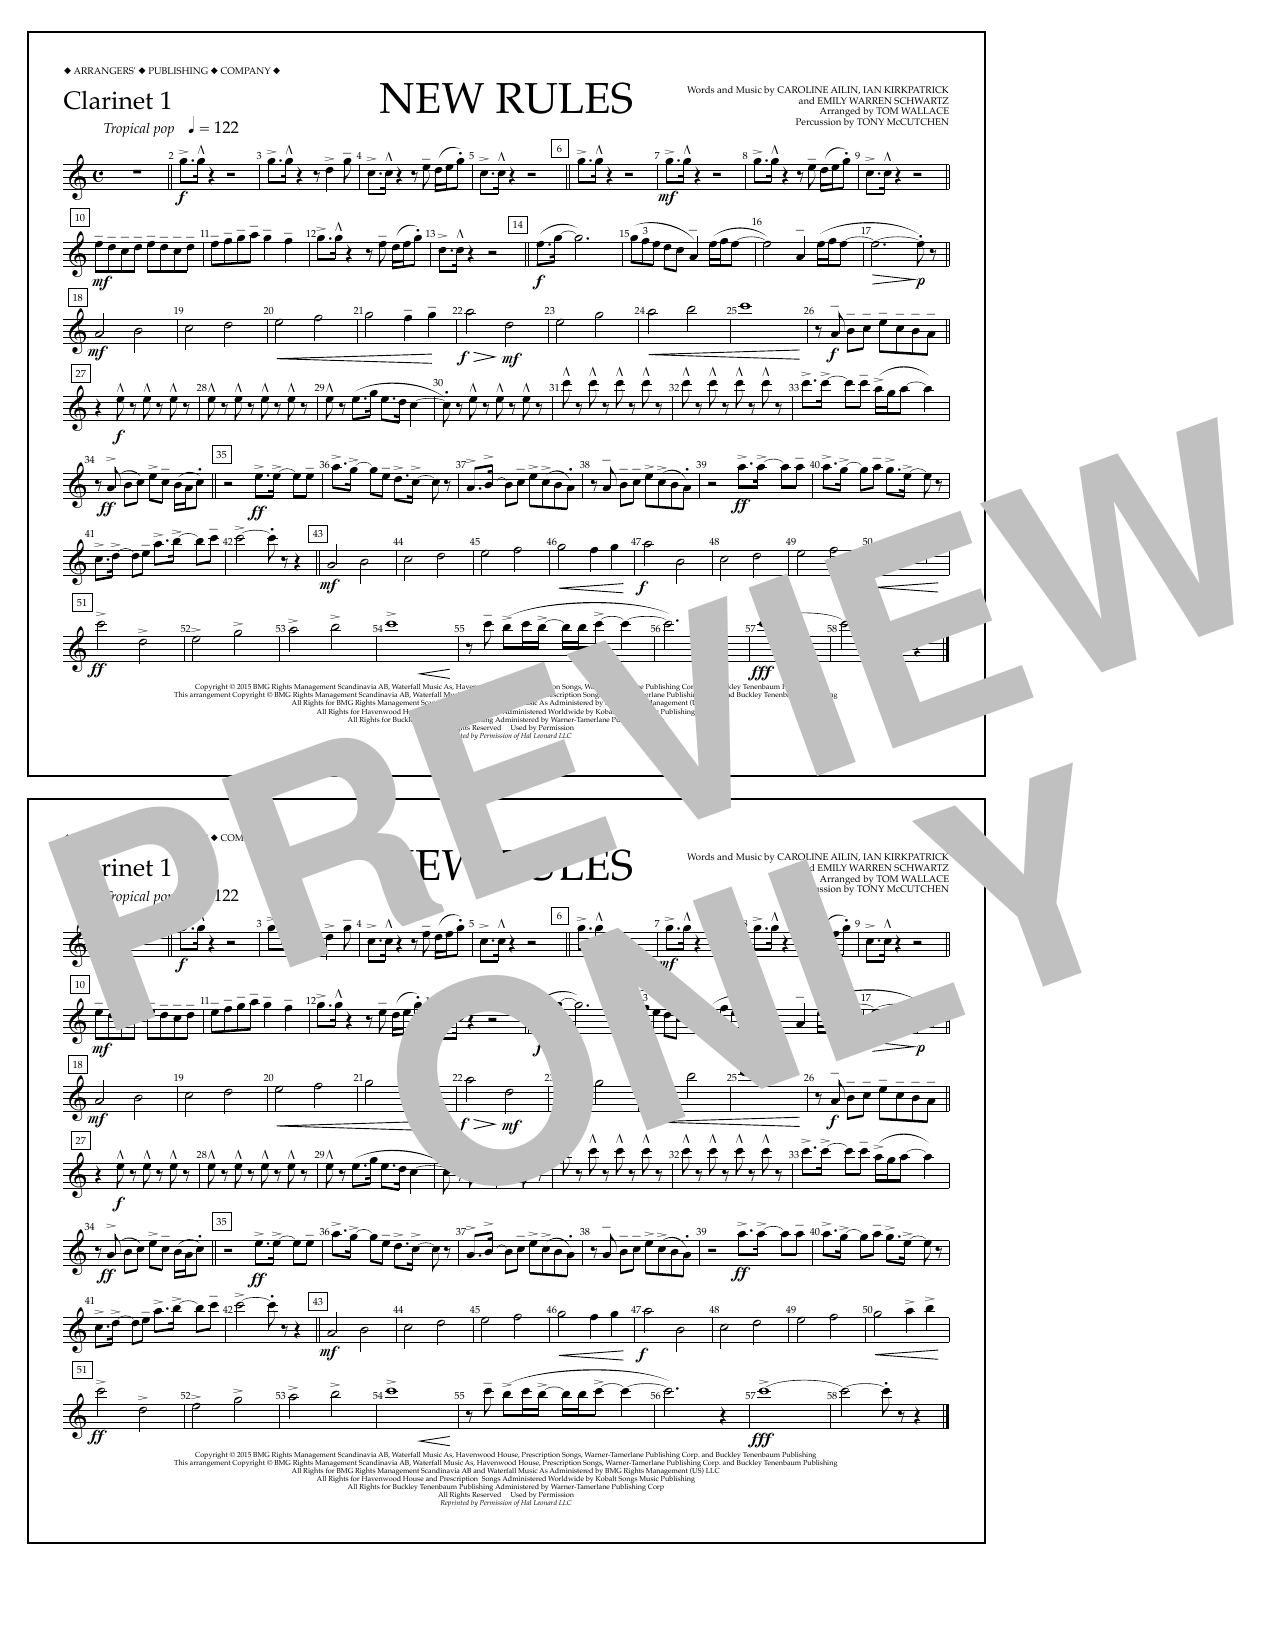 Download Tom Wallace New Rules - Clarinet 1 Sheet Music